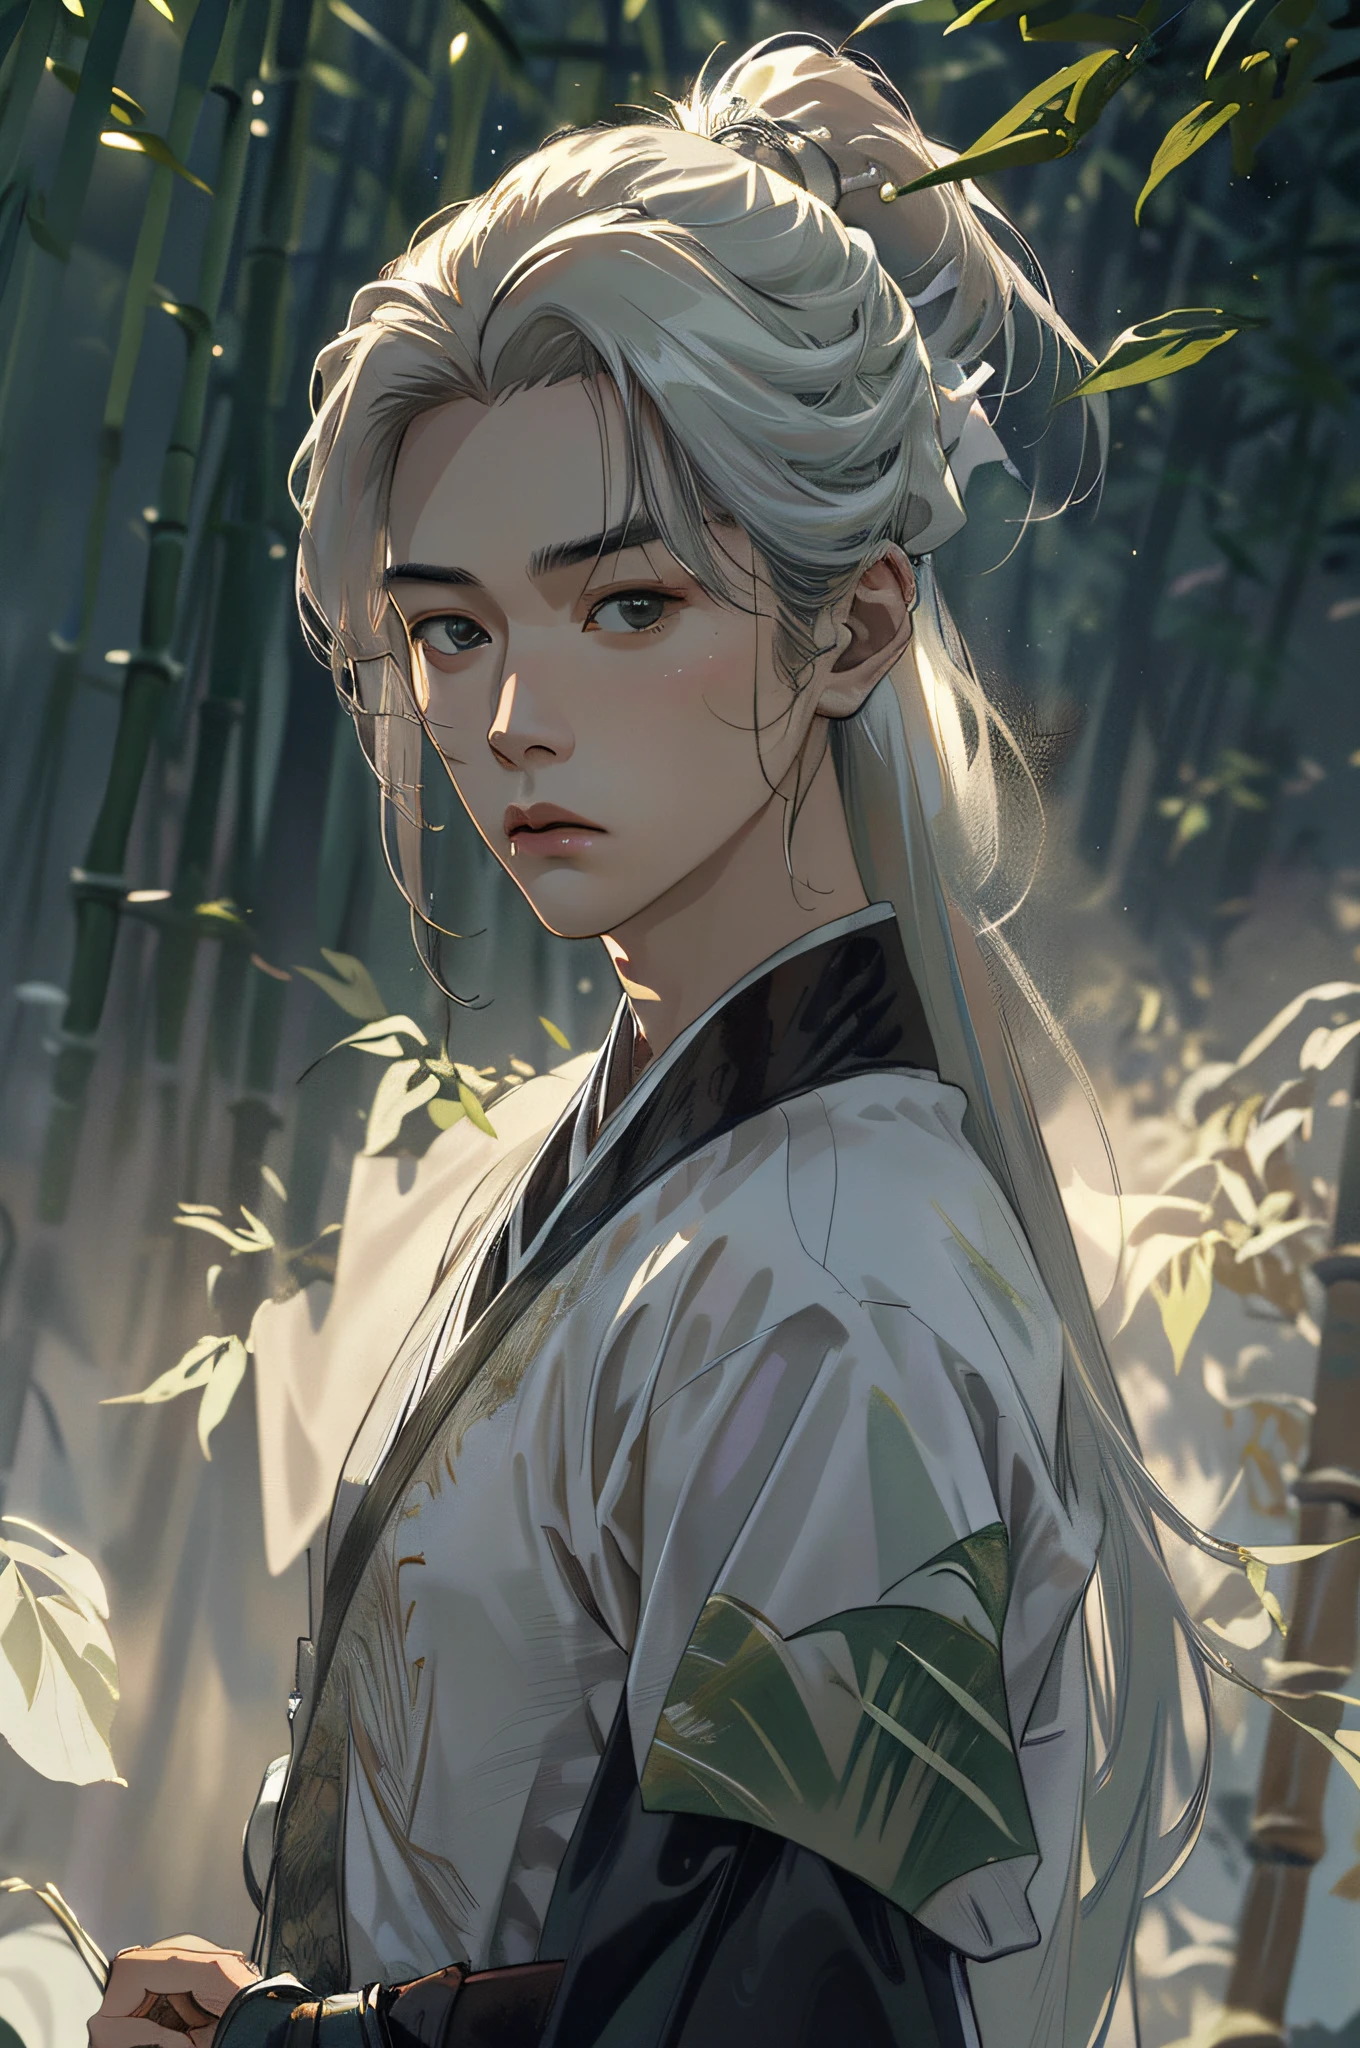 (Best Quality), (Realisticity: 1), Realistic Skin Texture, Highly Detailed, 8k Wallpaper, Masterpiece, Ultra Detailed, Detailed Facial Features, Volume Lighting, Dynamic Lighting, Bust Shot, 1 Man, Man, Bamboo Forest, Long White Hair, Ponytail, Green Headdress, Long Sword Held, Bamboo Leaves Falling, Hazy Smoke, Black Hanfu, Long Sword in Hand, Movie Lighting, Dynamic Perspective,